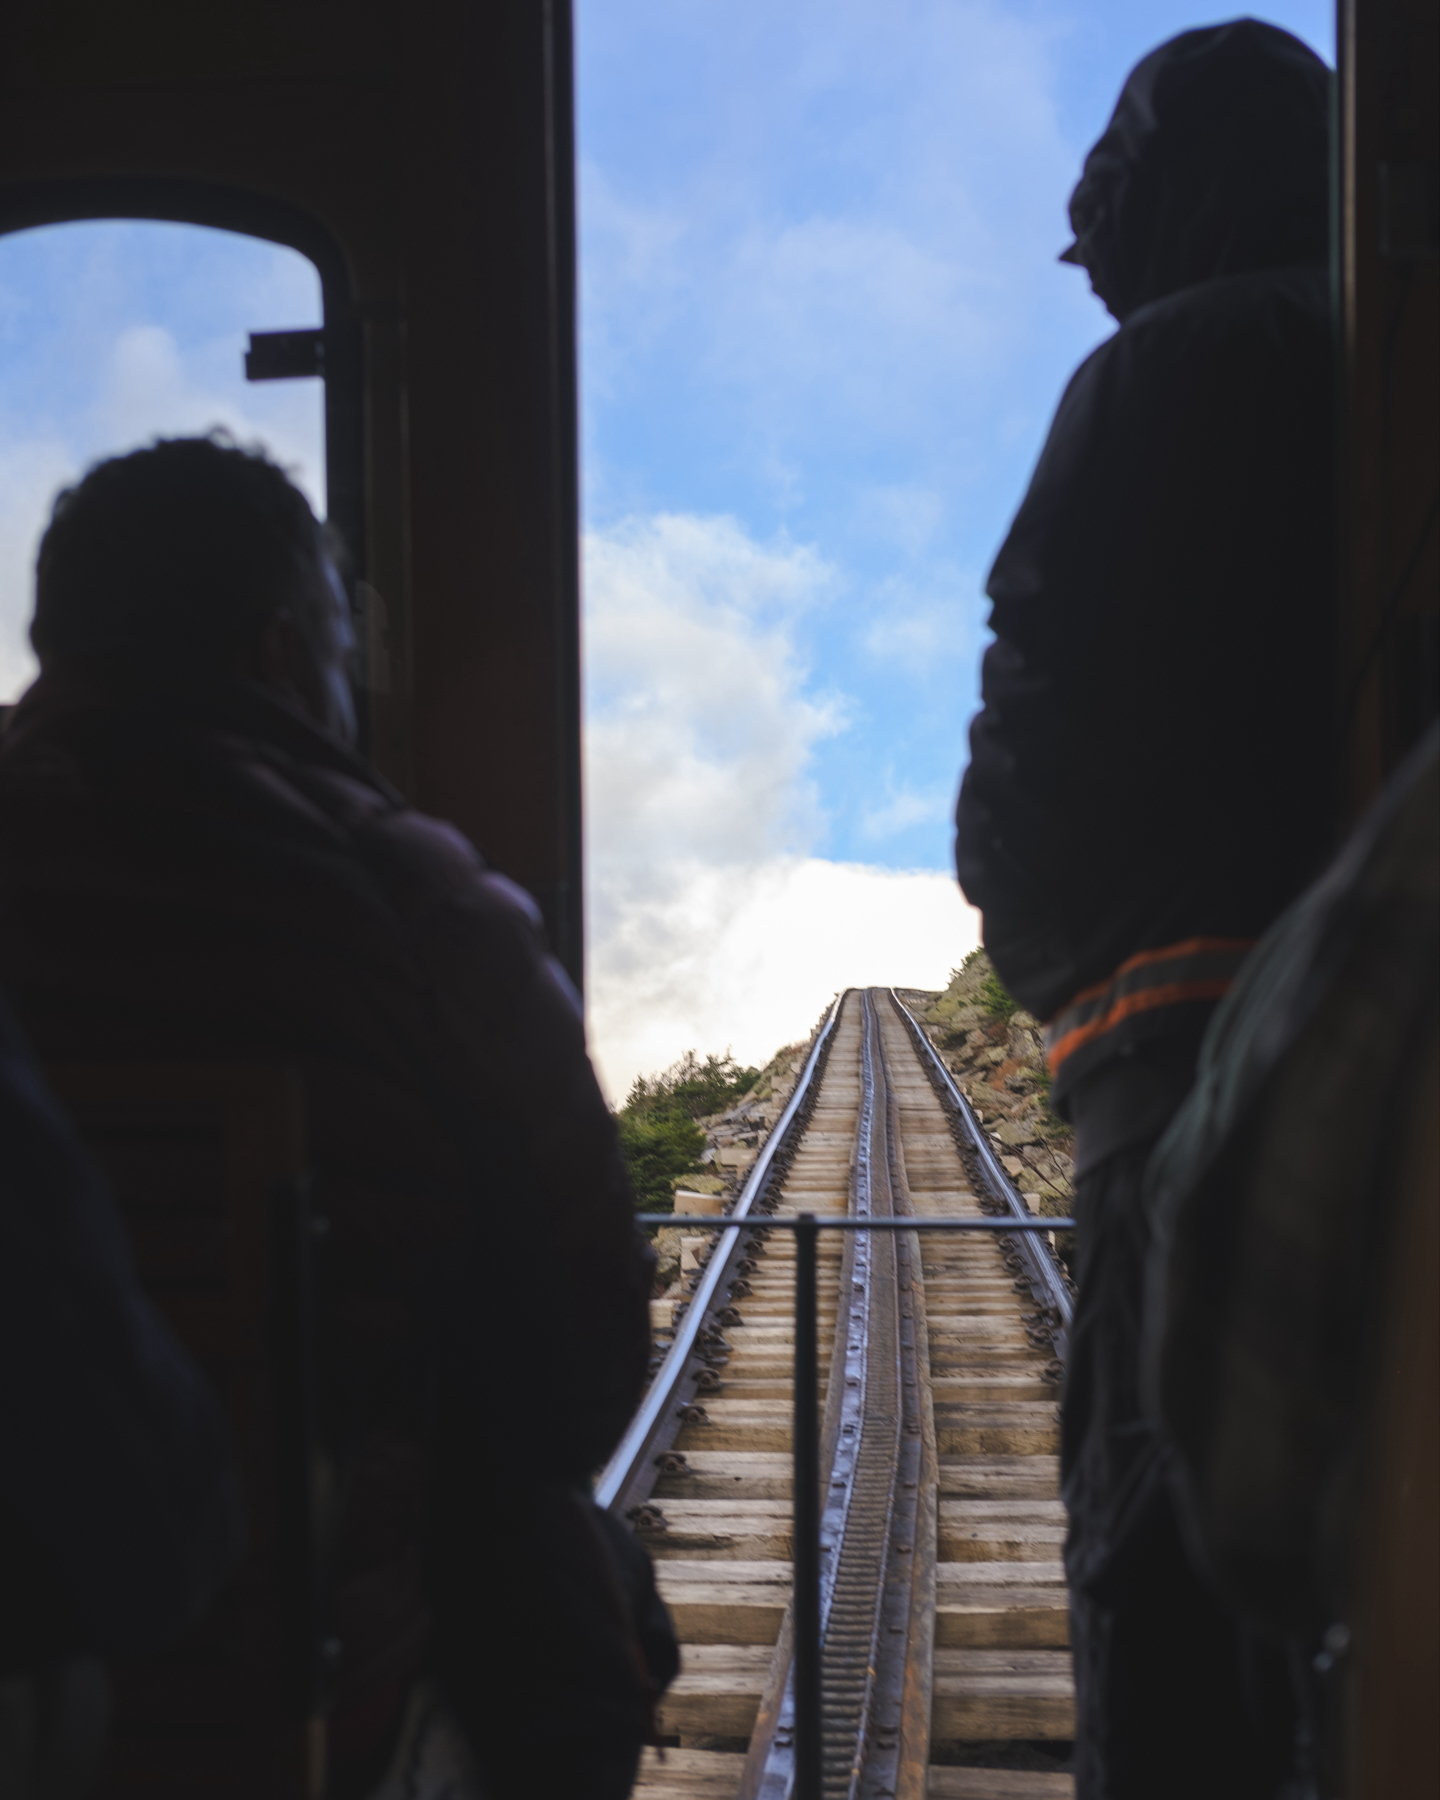 A view from inside a train looking up a steep railway track with passengers and the brakeman silhouetted against the sky.